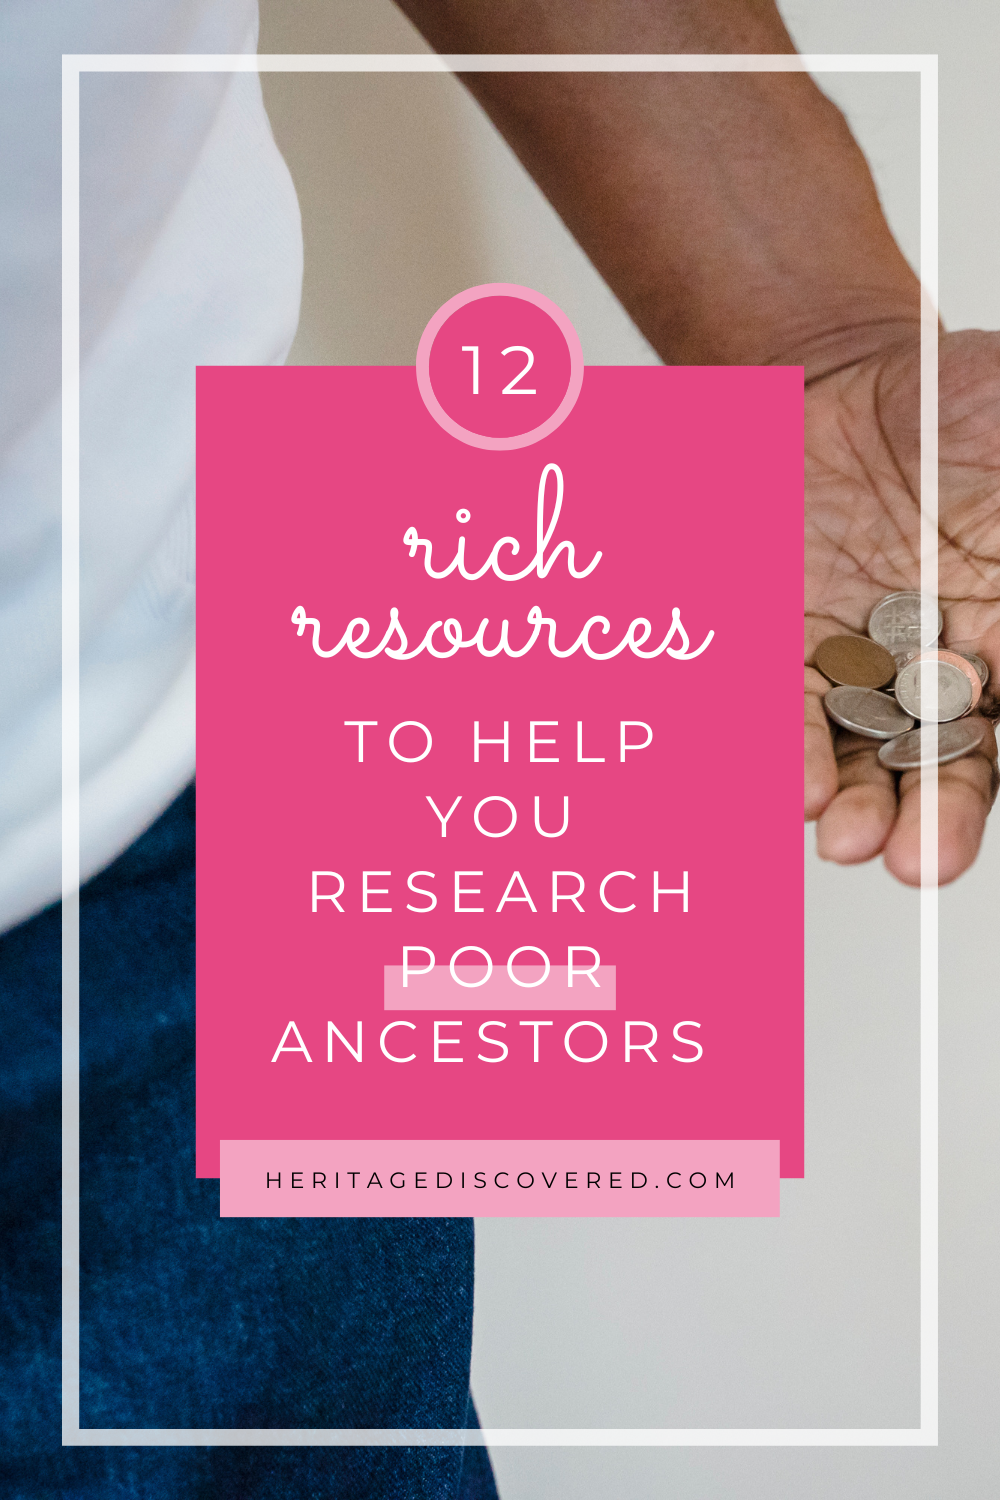 12-rich-resources-for-researching-poor-ancestors